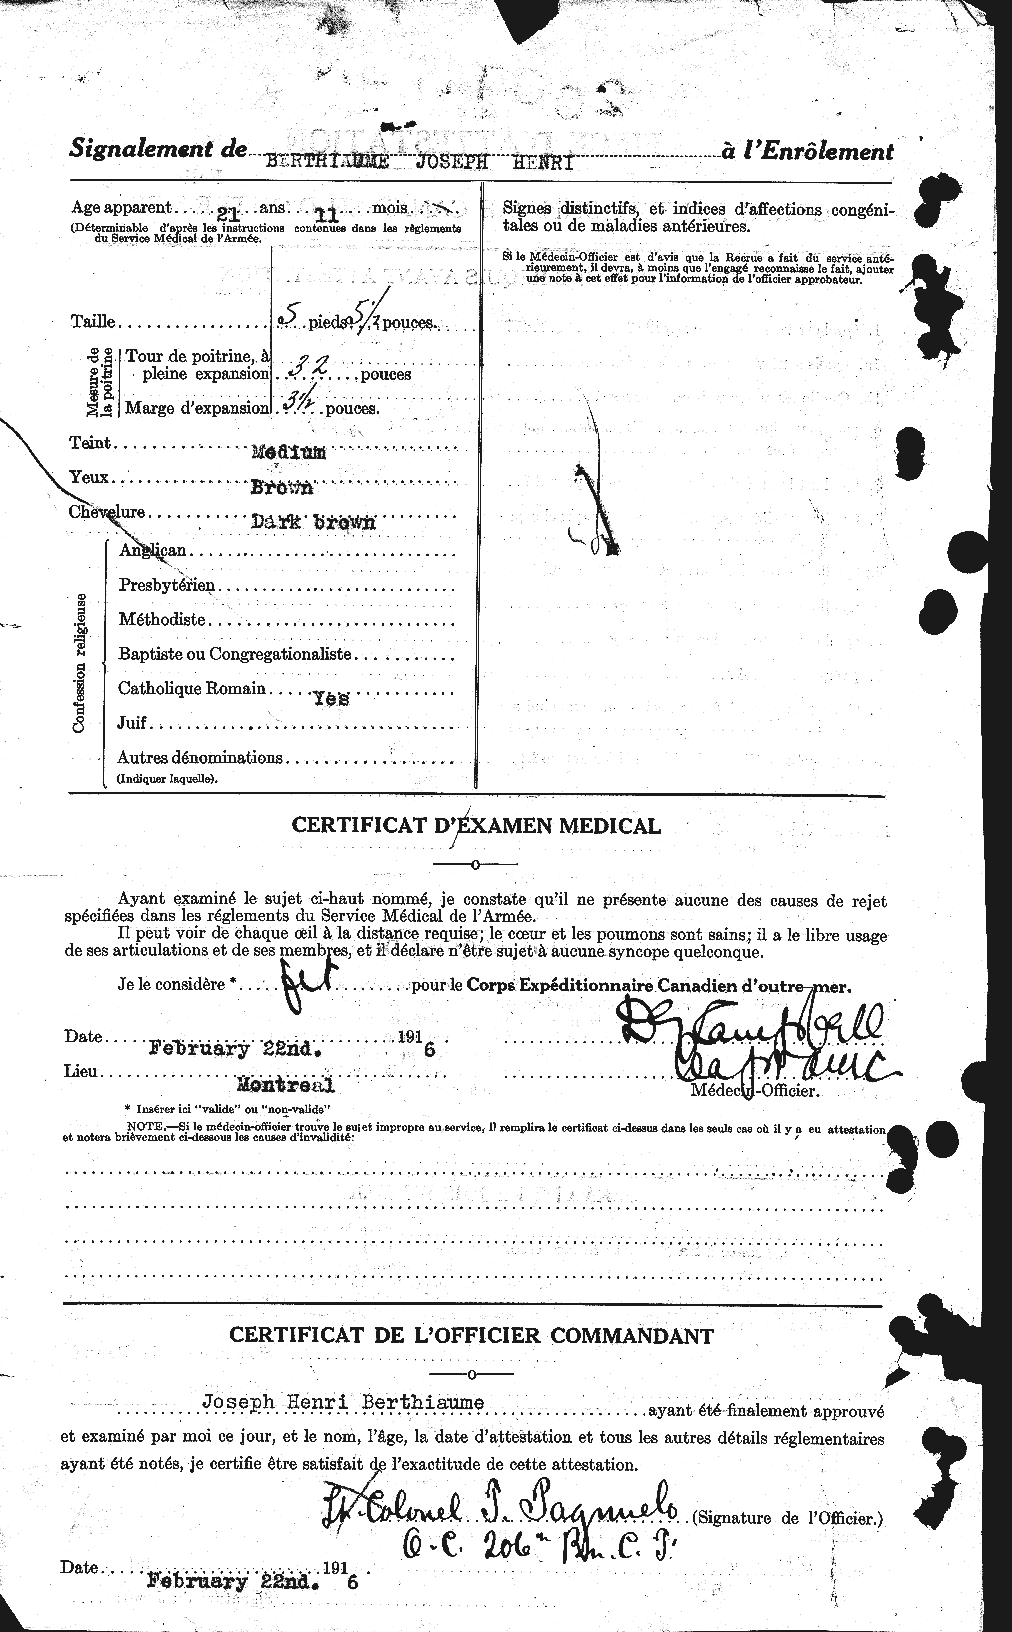 Personnel Records of the First World War - CEF 235635b